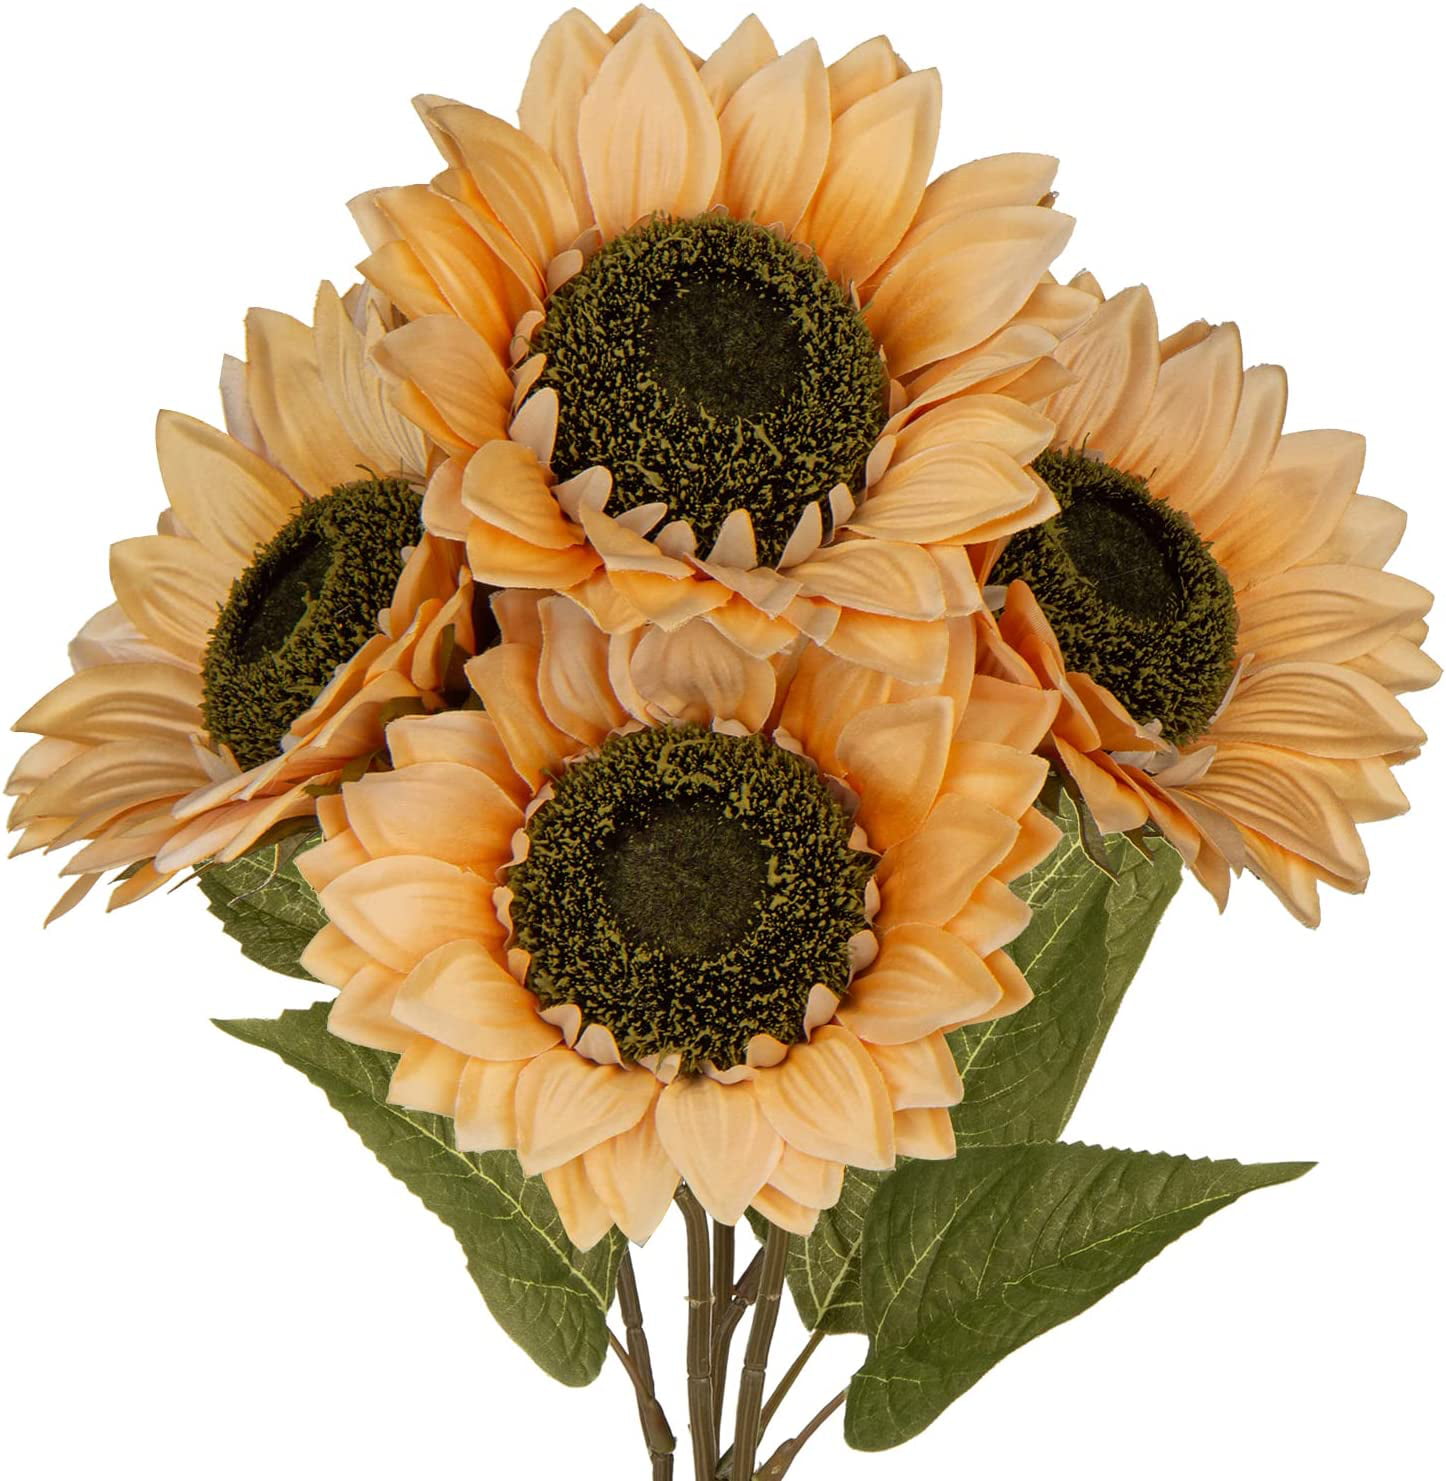 Large Silk Sunflowers Artificial Flowers 25 Long Stem Tall Artificial  Sunflower 4PCS Fake Sun Flowers Bulk Rustic Faux Sunflowers with Stem for  Home